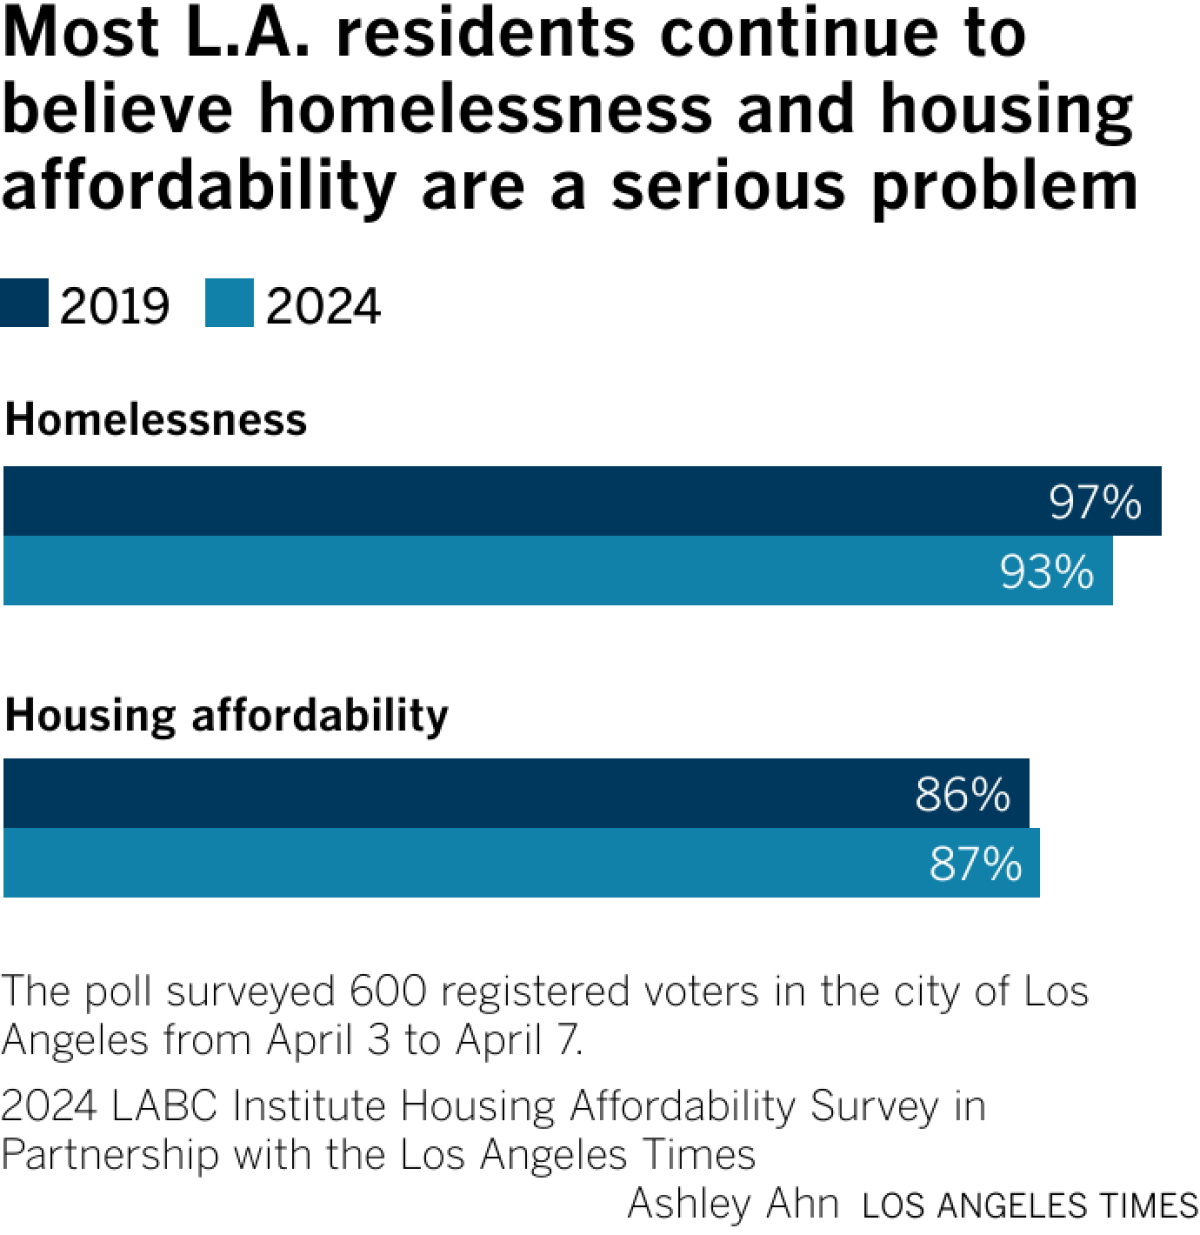 About 93% of Los Angeles residents think homelessness is a serious problem, up from 95% in 2019. About 85% of Los Angeles residents think housing affordability is a serious problem, up from 87% in 2019.